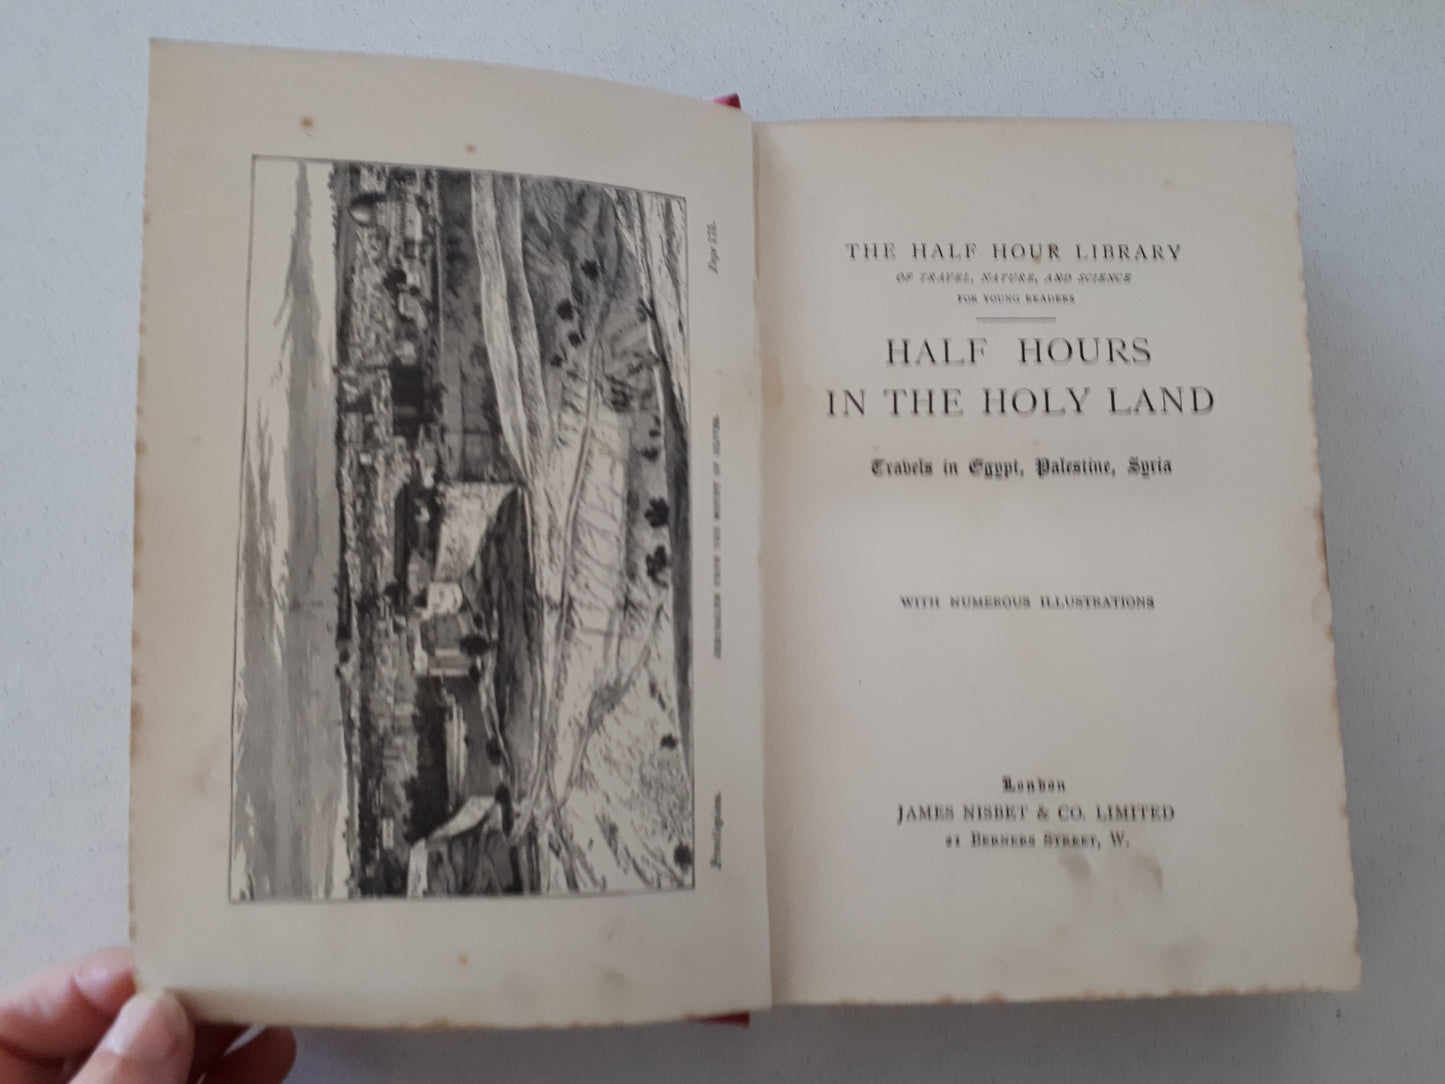 Half Hours in the Holy Land - Travels in Egypt, Palestine , Syria [c.1896]